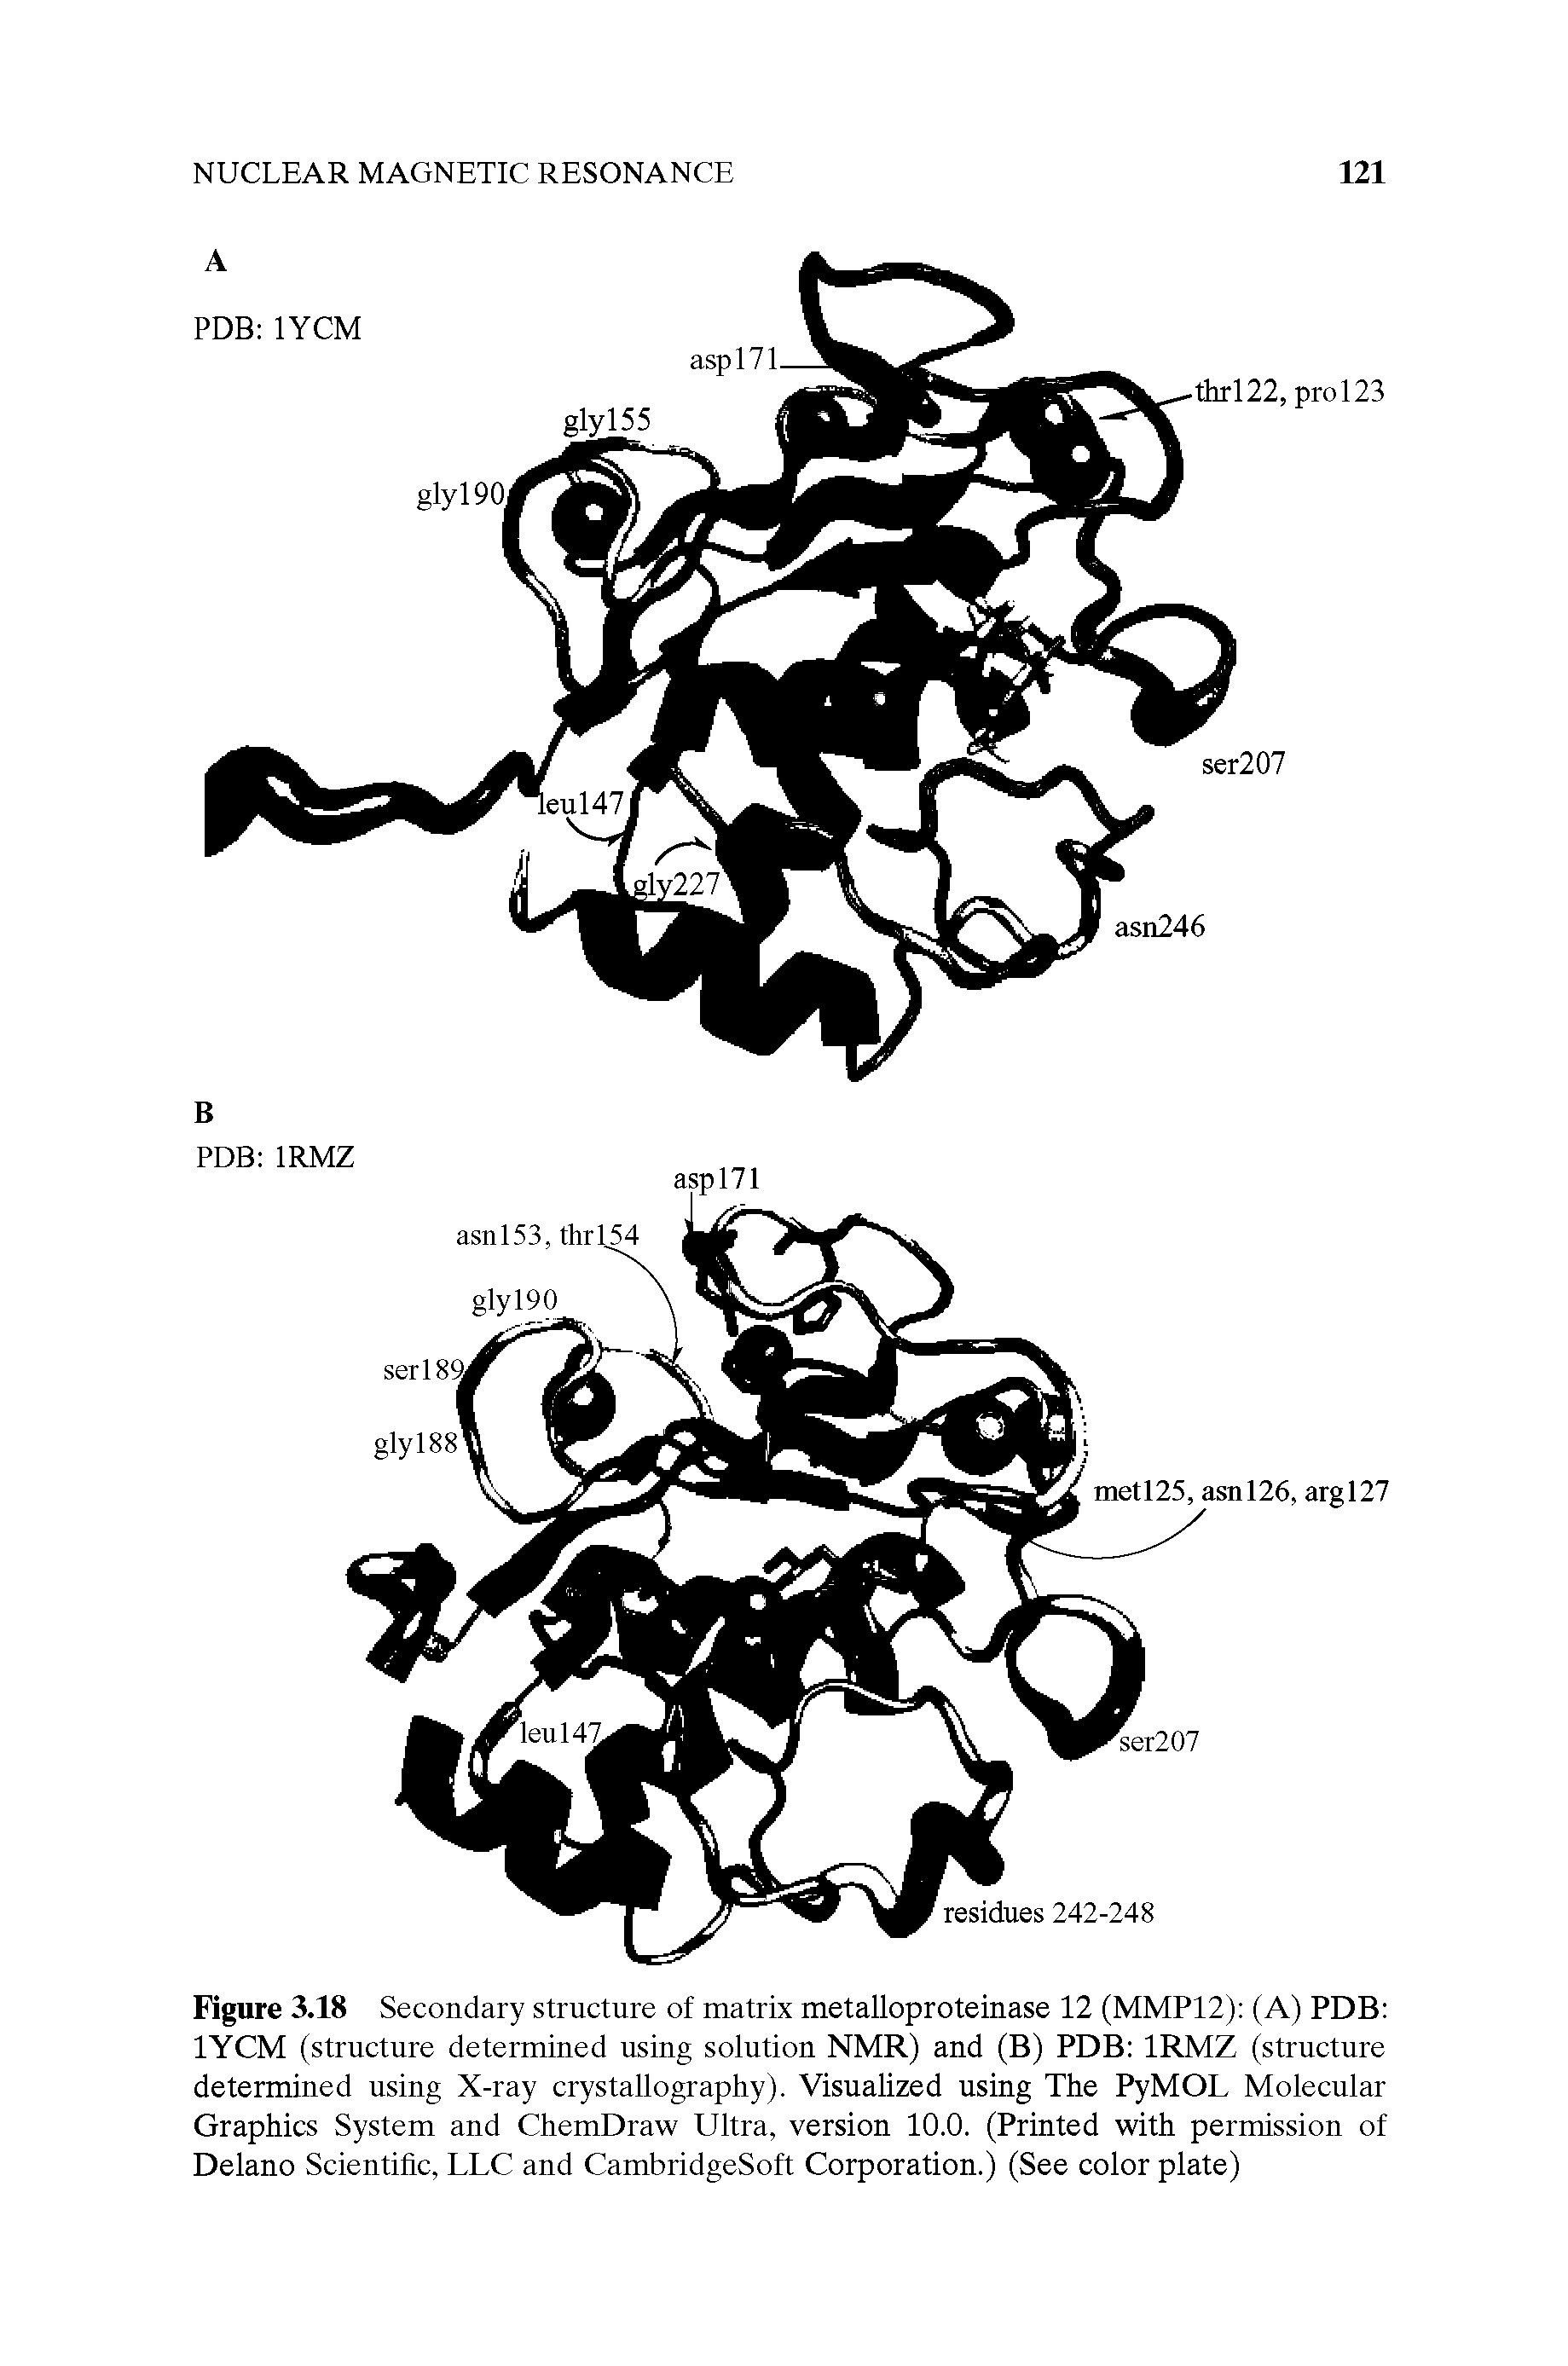 Figure 3.18 Secondary structure of matrix metalloproteinase 12 (MMP12) (A) PDB lYCM (structure determined using solution NMR) and (B) PDB IRMZ (structure determined using X-ray crystallography). Visualized using The PyMOL Molecular Graphics System and ChemDraw Ultra, version 10.0. (Printed with permission of Delano Scientific, LLC and CambridgeSoft Corporation.) (See color plate)...